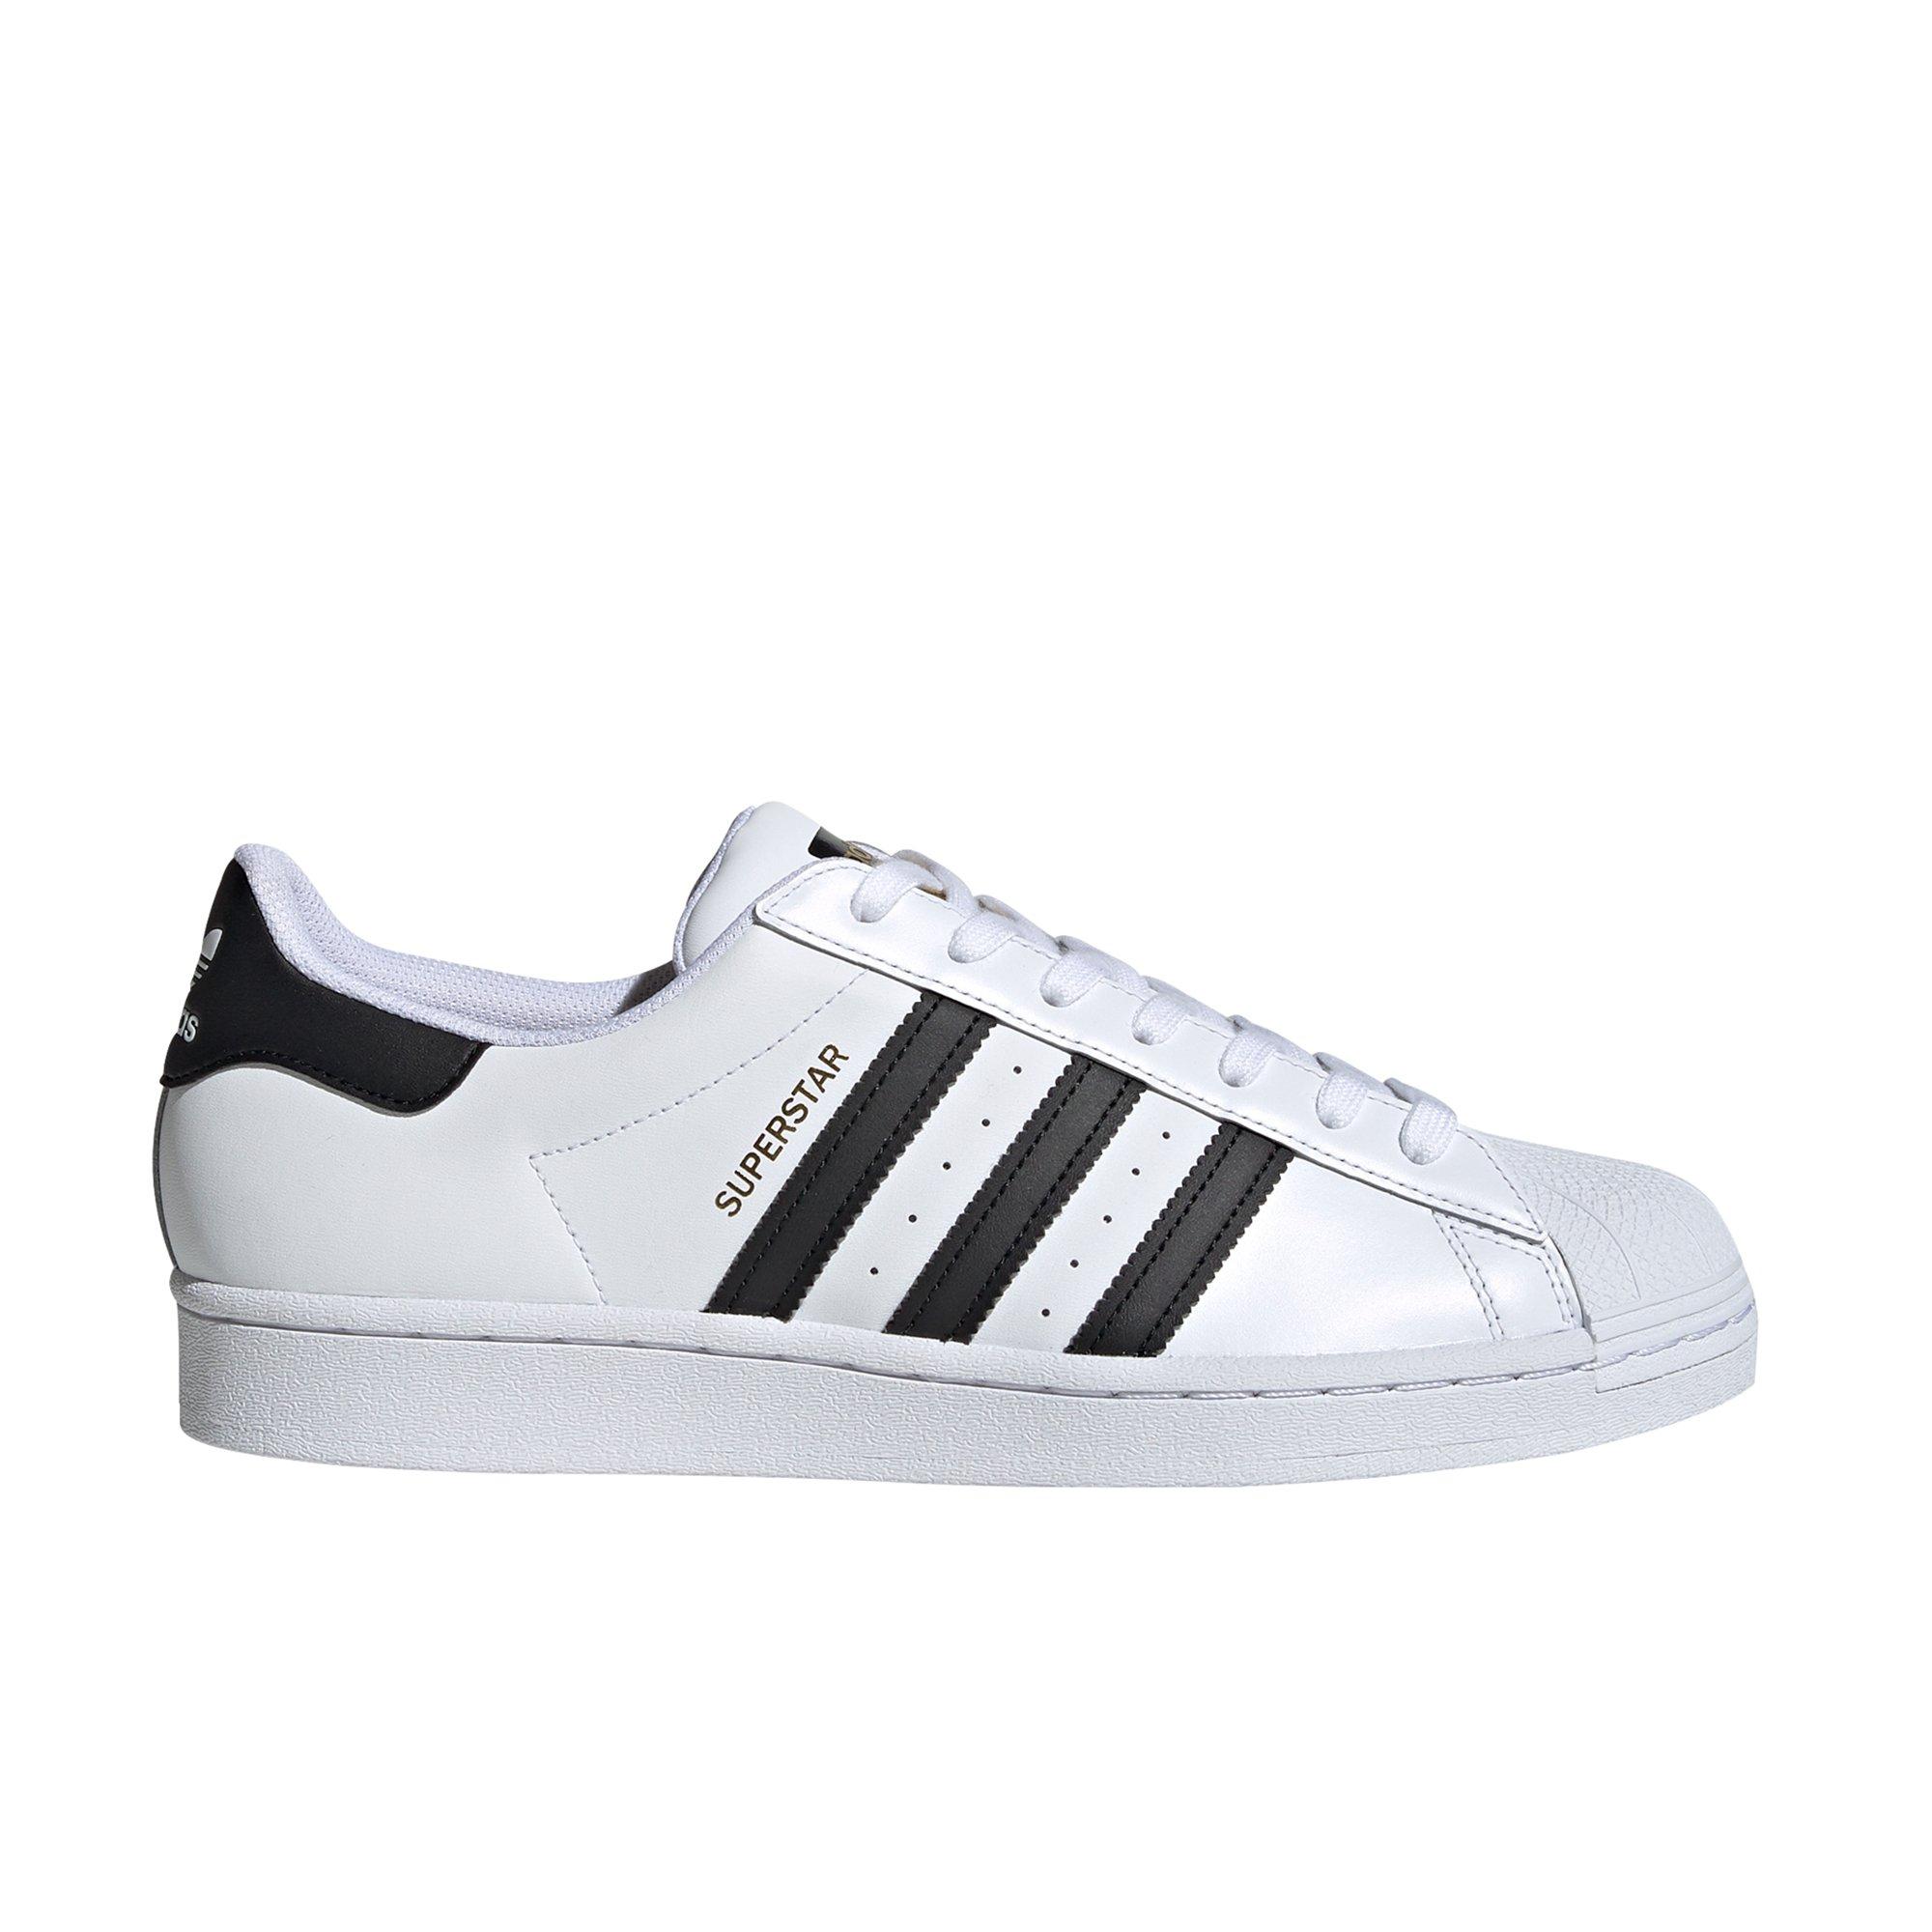 mens sneakers clearance sale